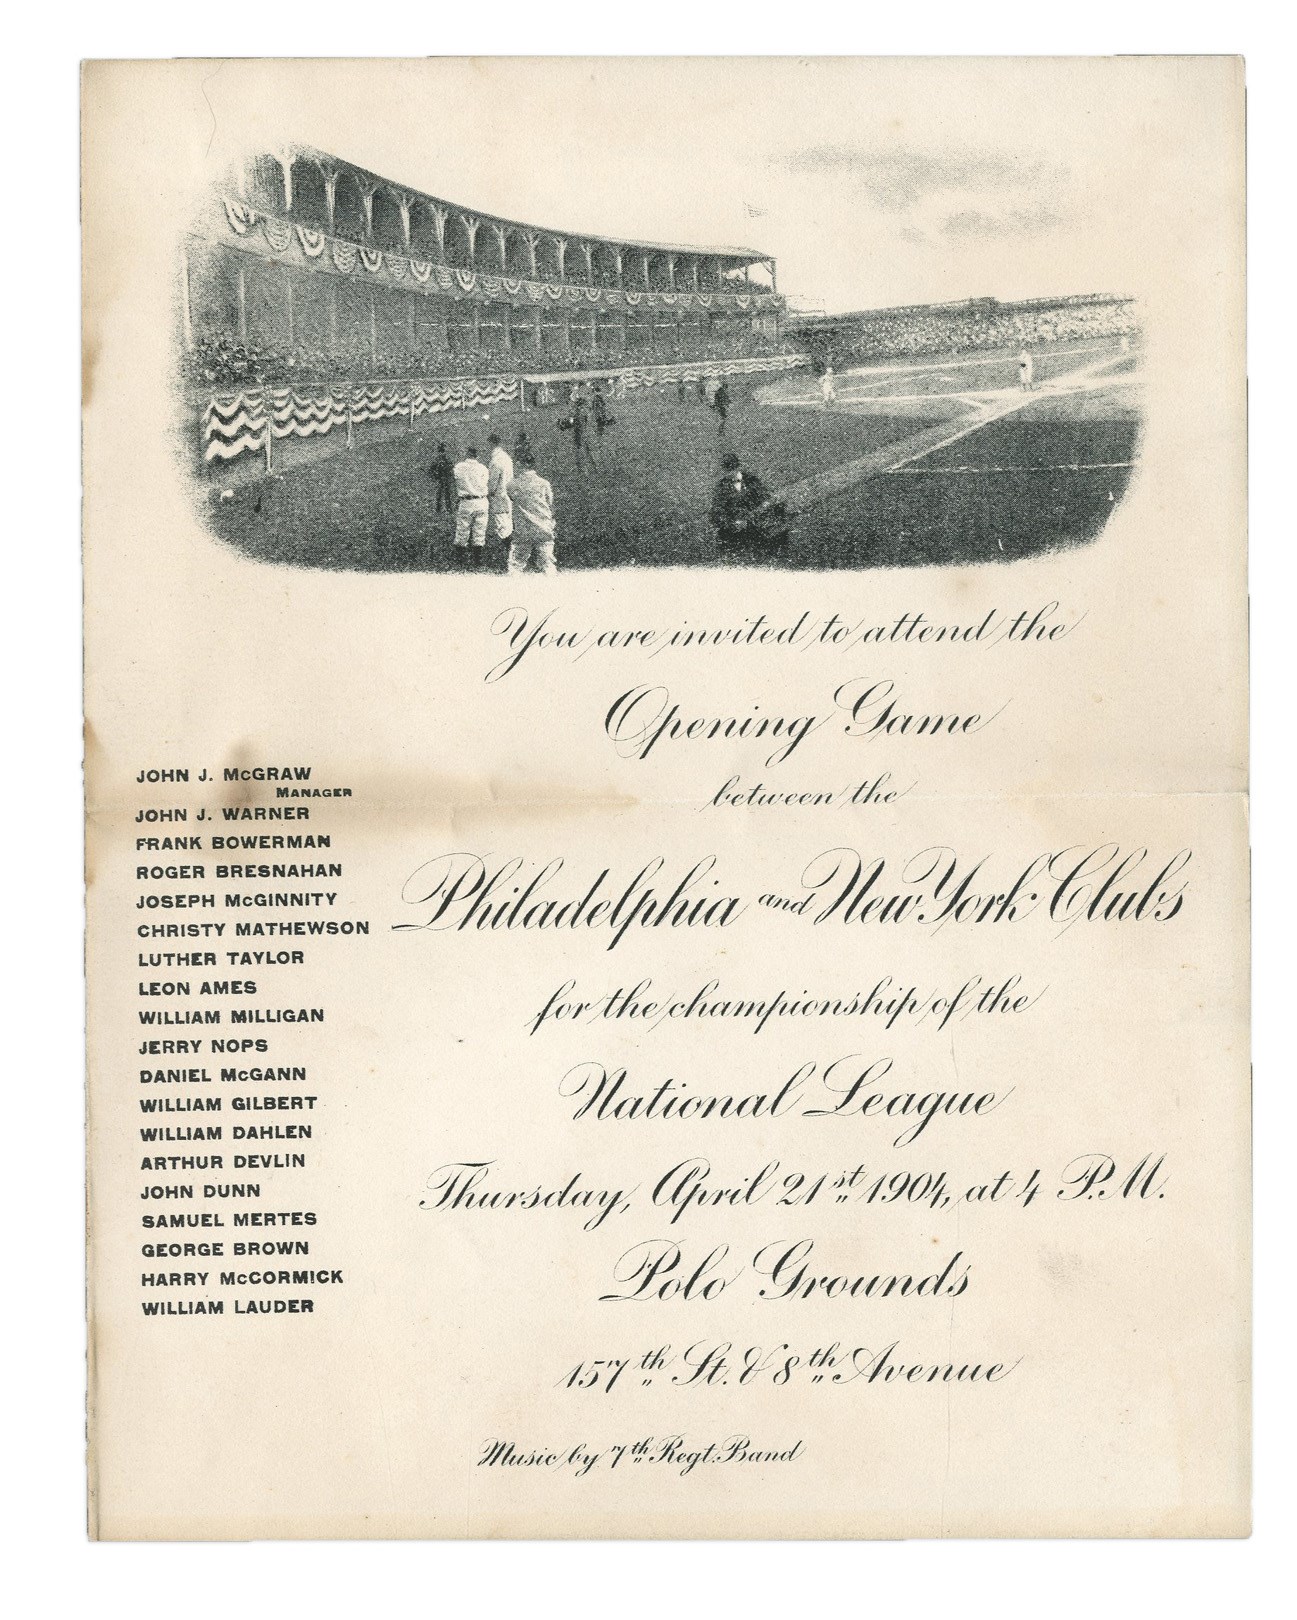 NY Yankees, Giants & Mets - 1904 New York Giants Polo Grounds Opening Day Invitation